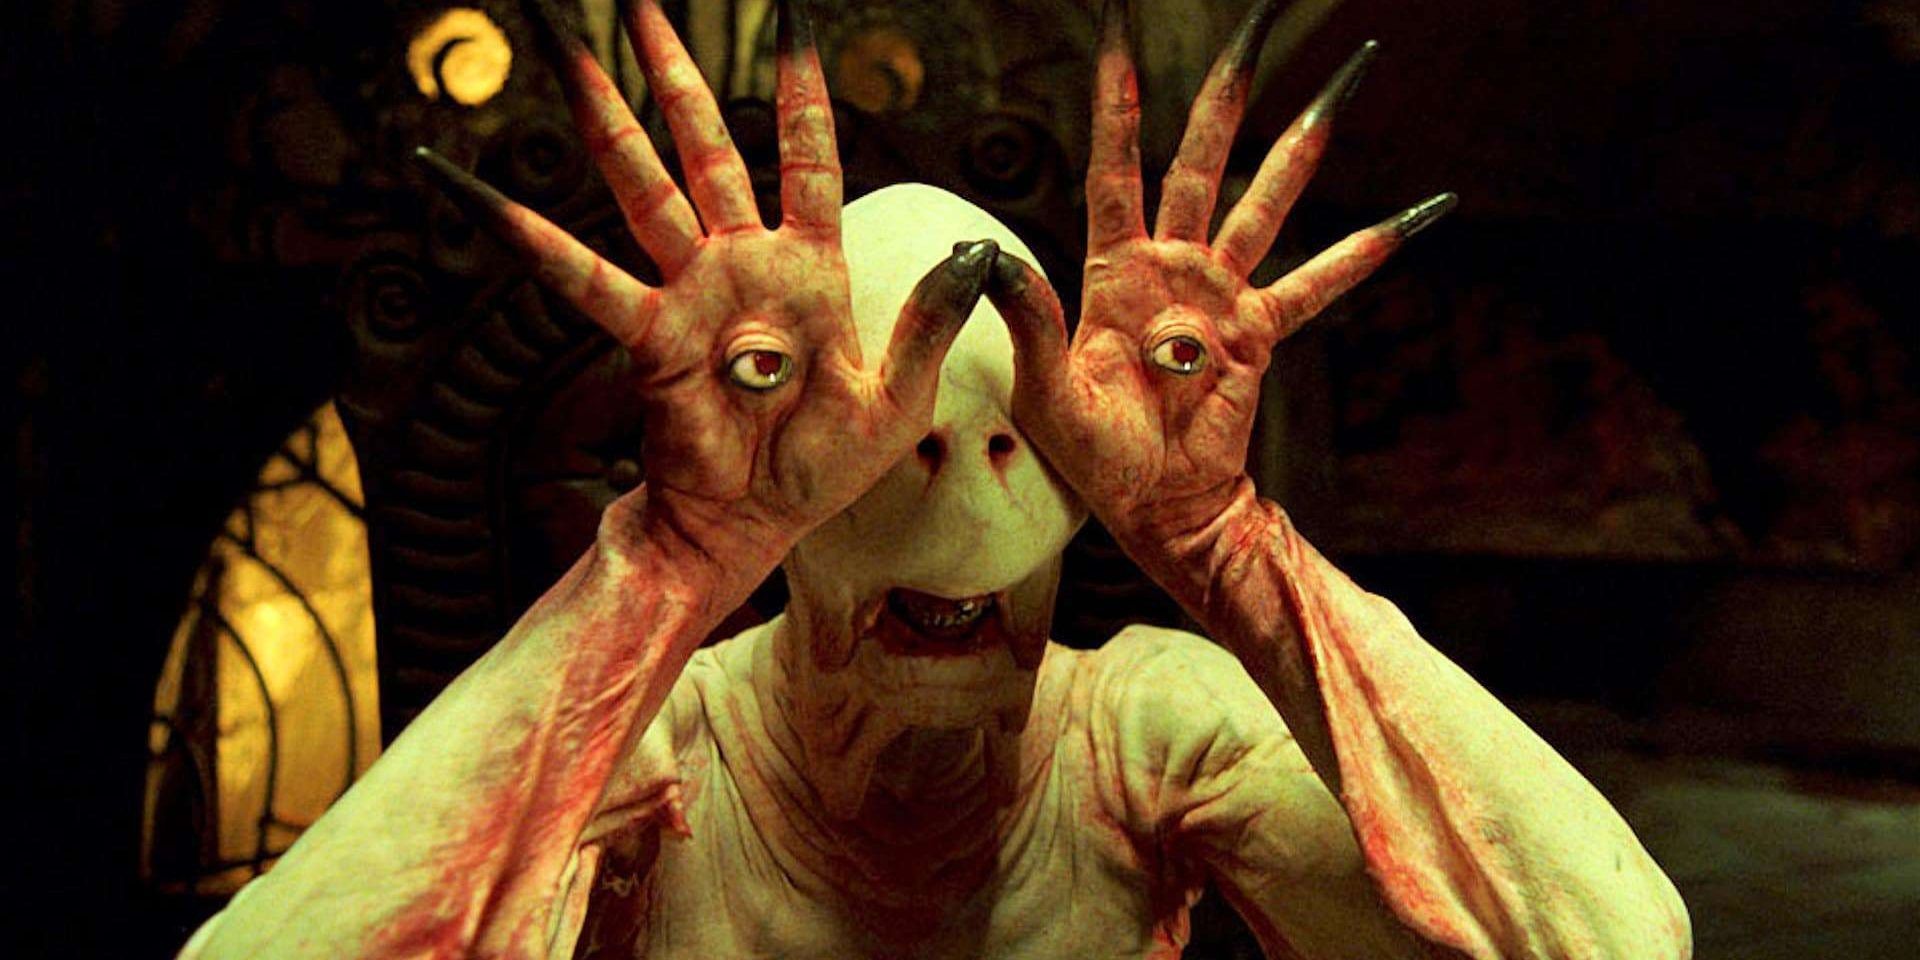 The Pale Man using his hands as eyes in Pan's Labyrinth